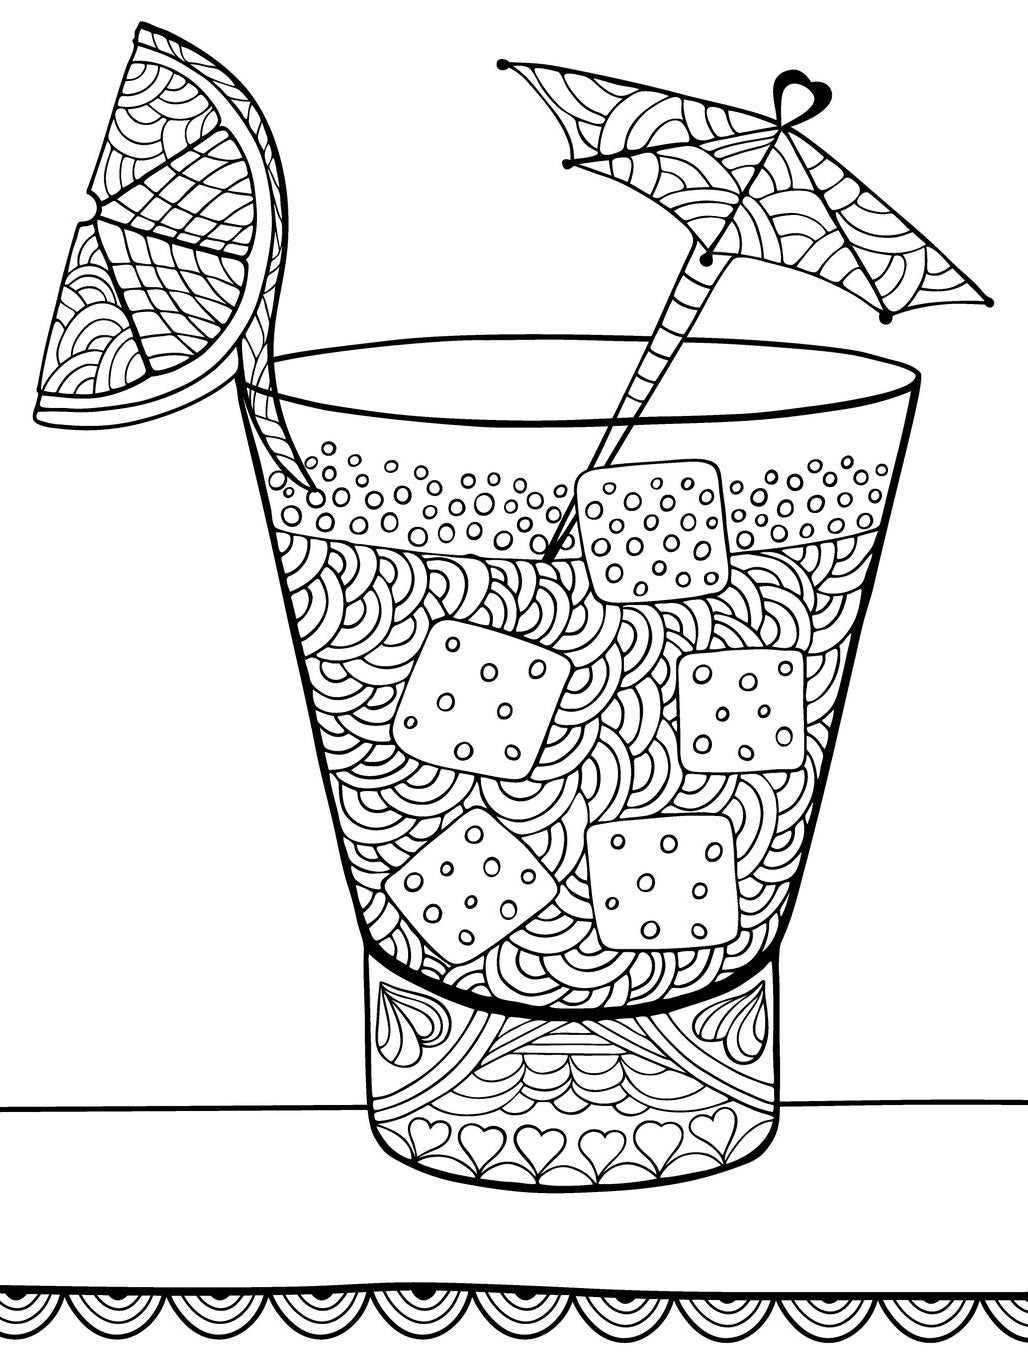 Alcohol Giggles - Wine & Cocktails PDF Coloring Book